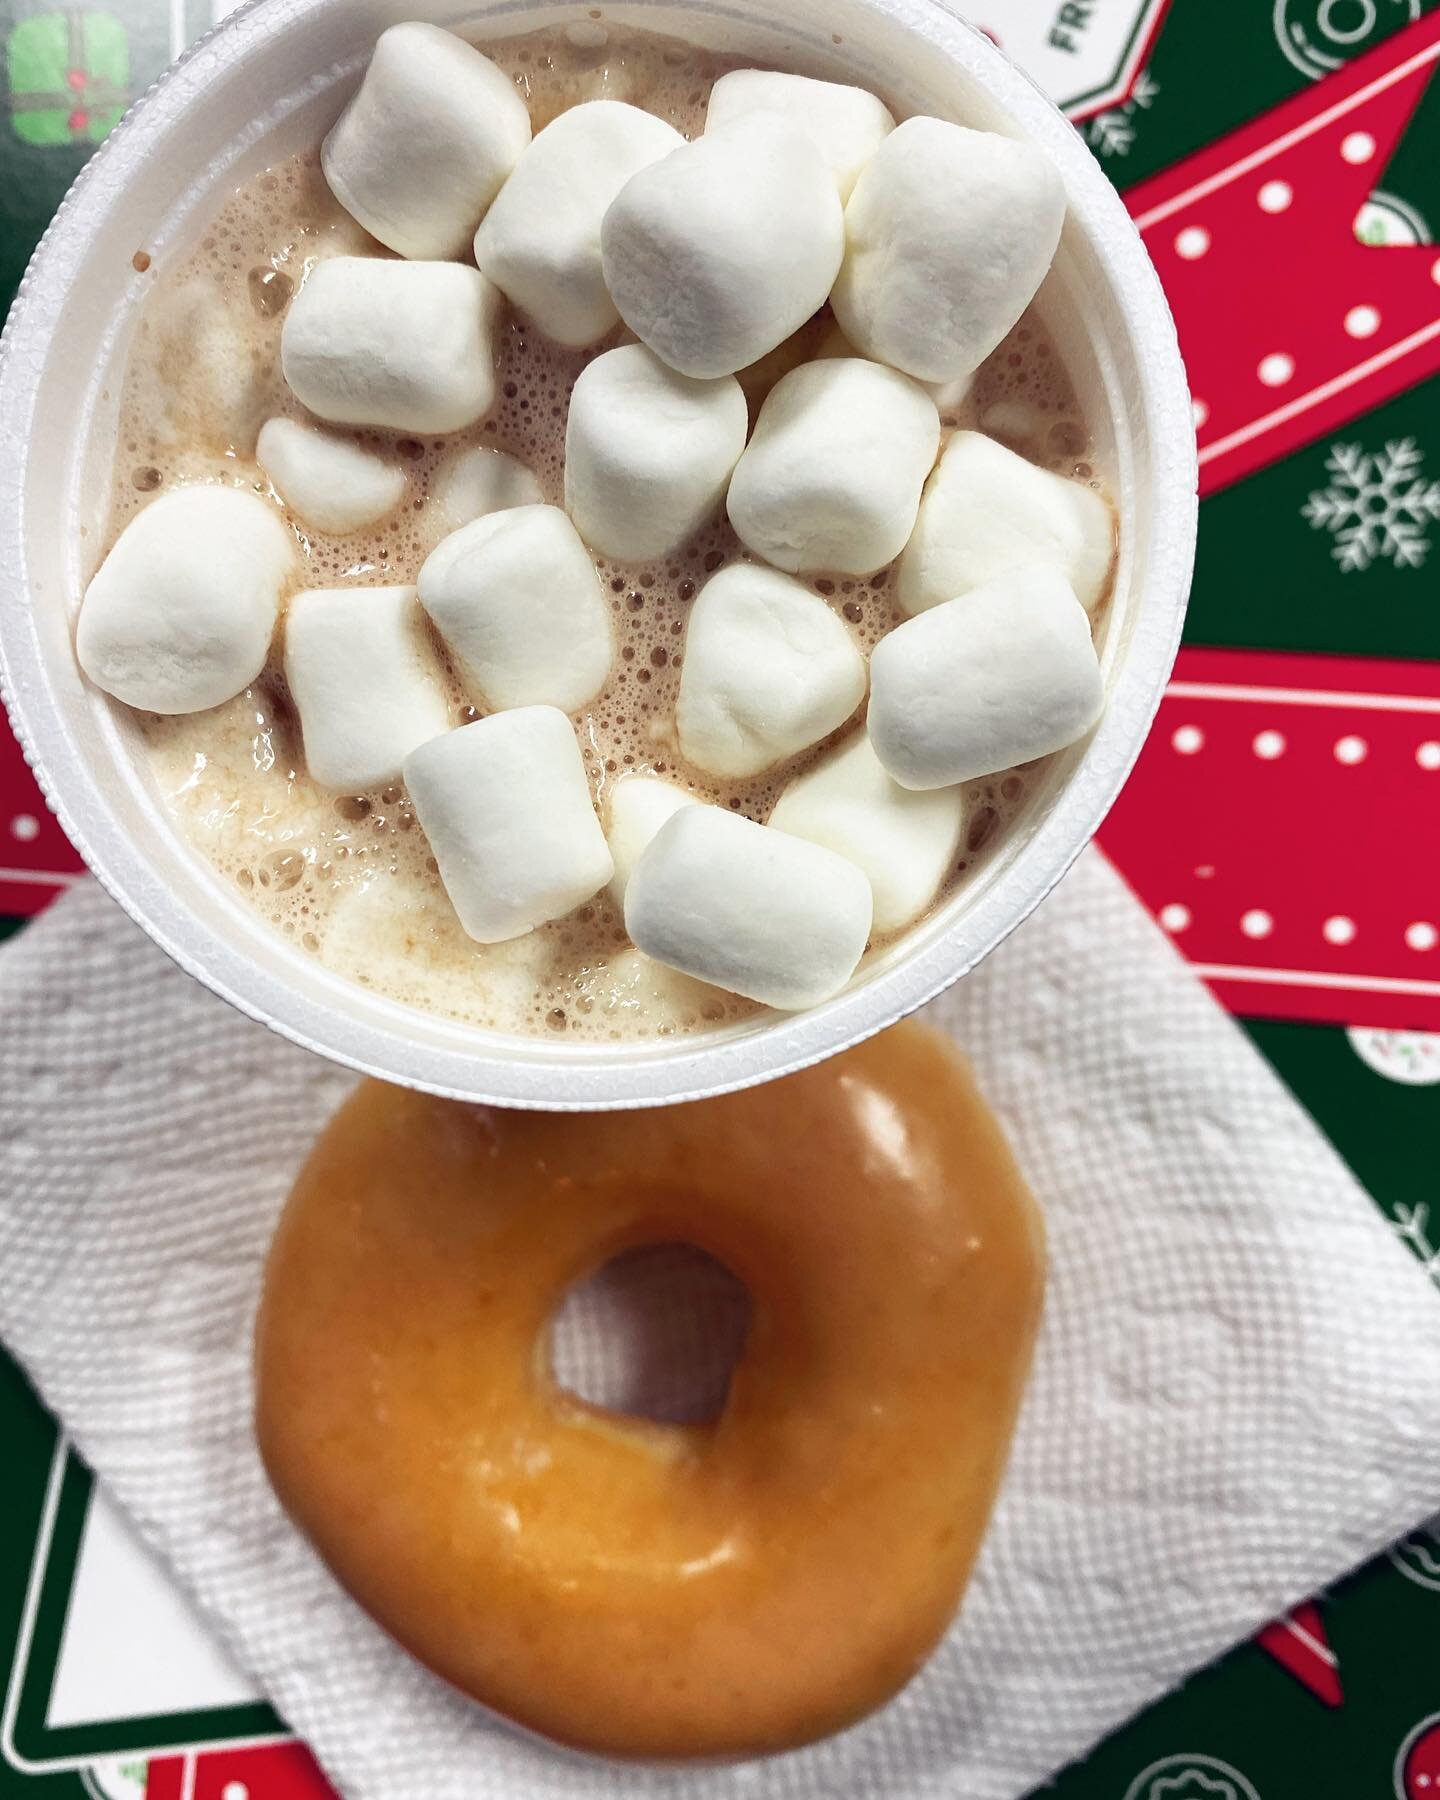 🎄Tis the season! 🎄
We want to keep you warm during these chilly days we&rsquo;ve been having lately. To do so, we now have hot chocolate and coffee!☕️ plus an additional treat of everybody&rsquo;s favorite... donuts! 🍩 
So come join us for some gr